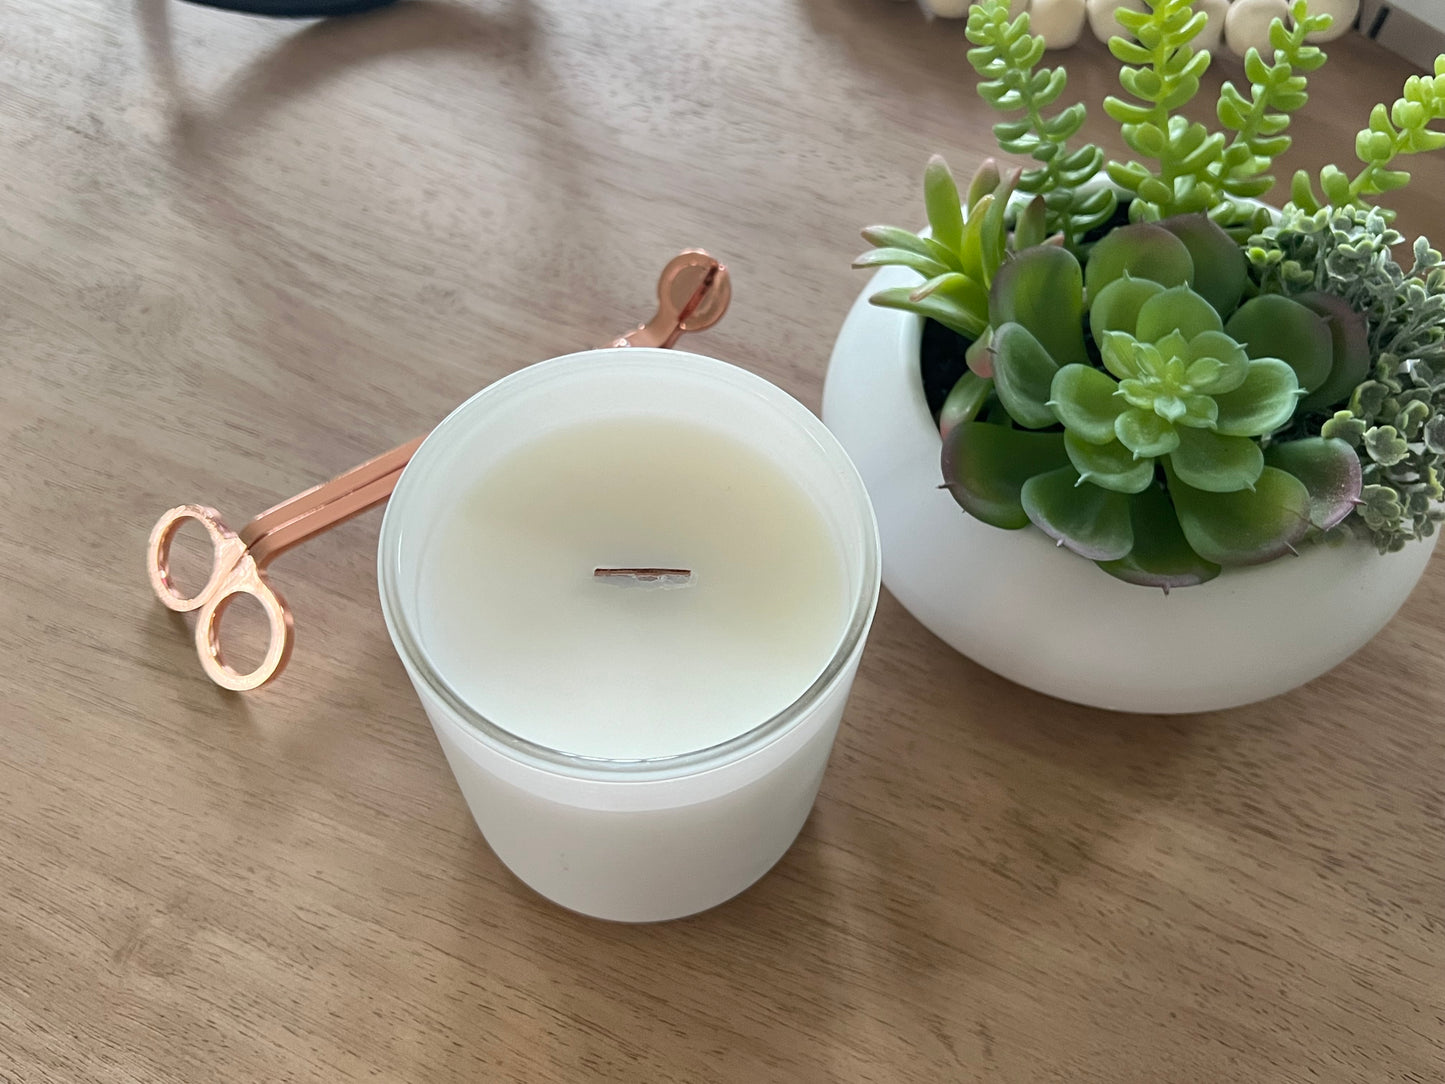 Grapefruit Crush Wooden Wick Candle (13 oz)